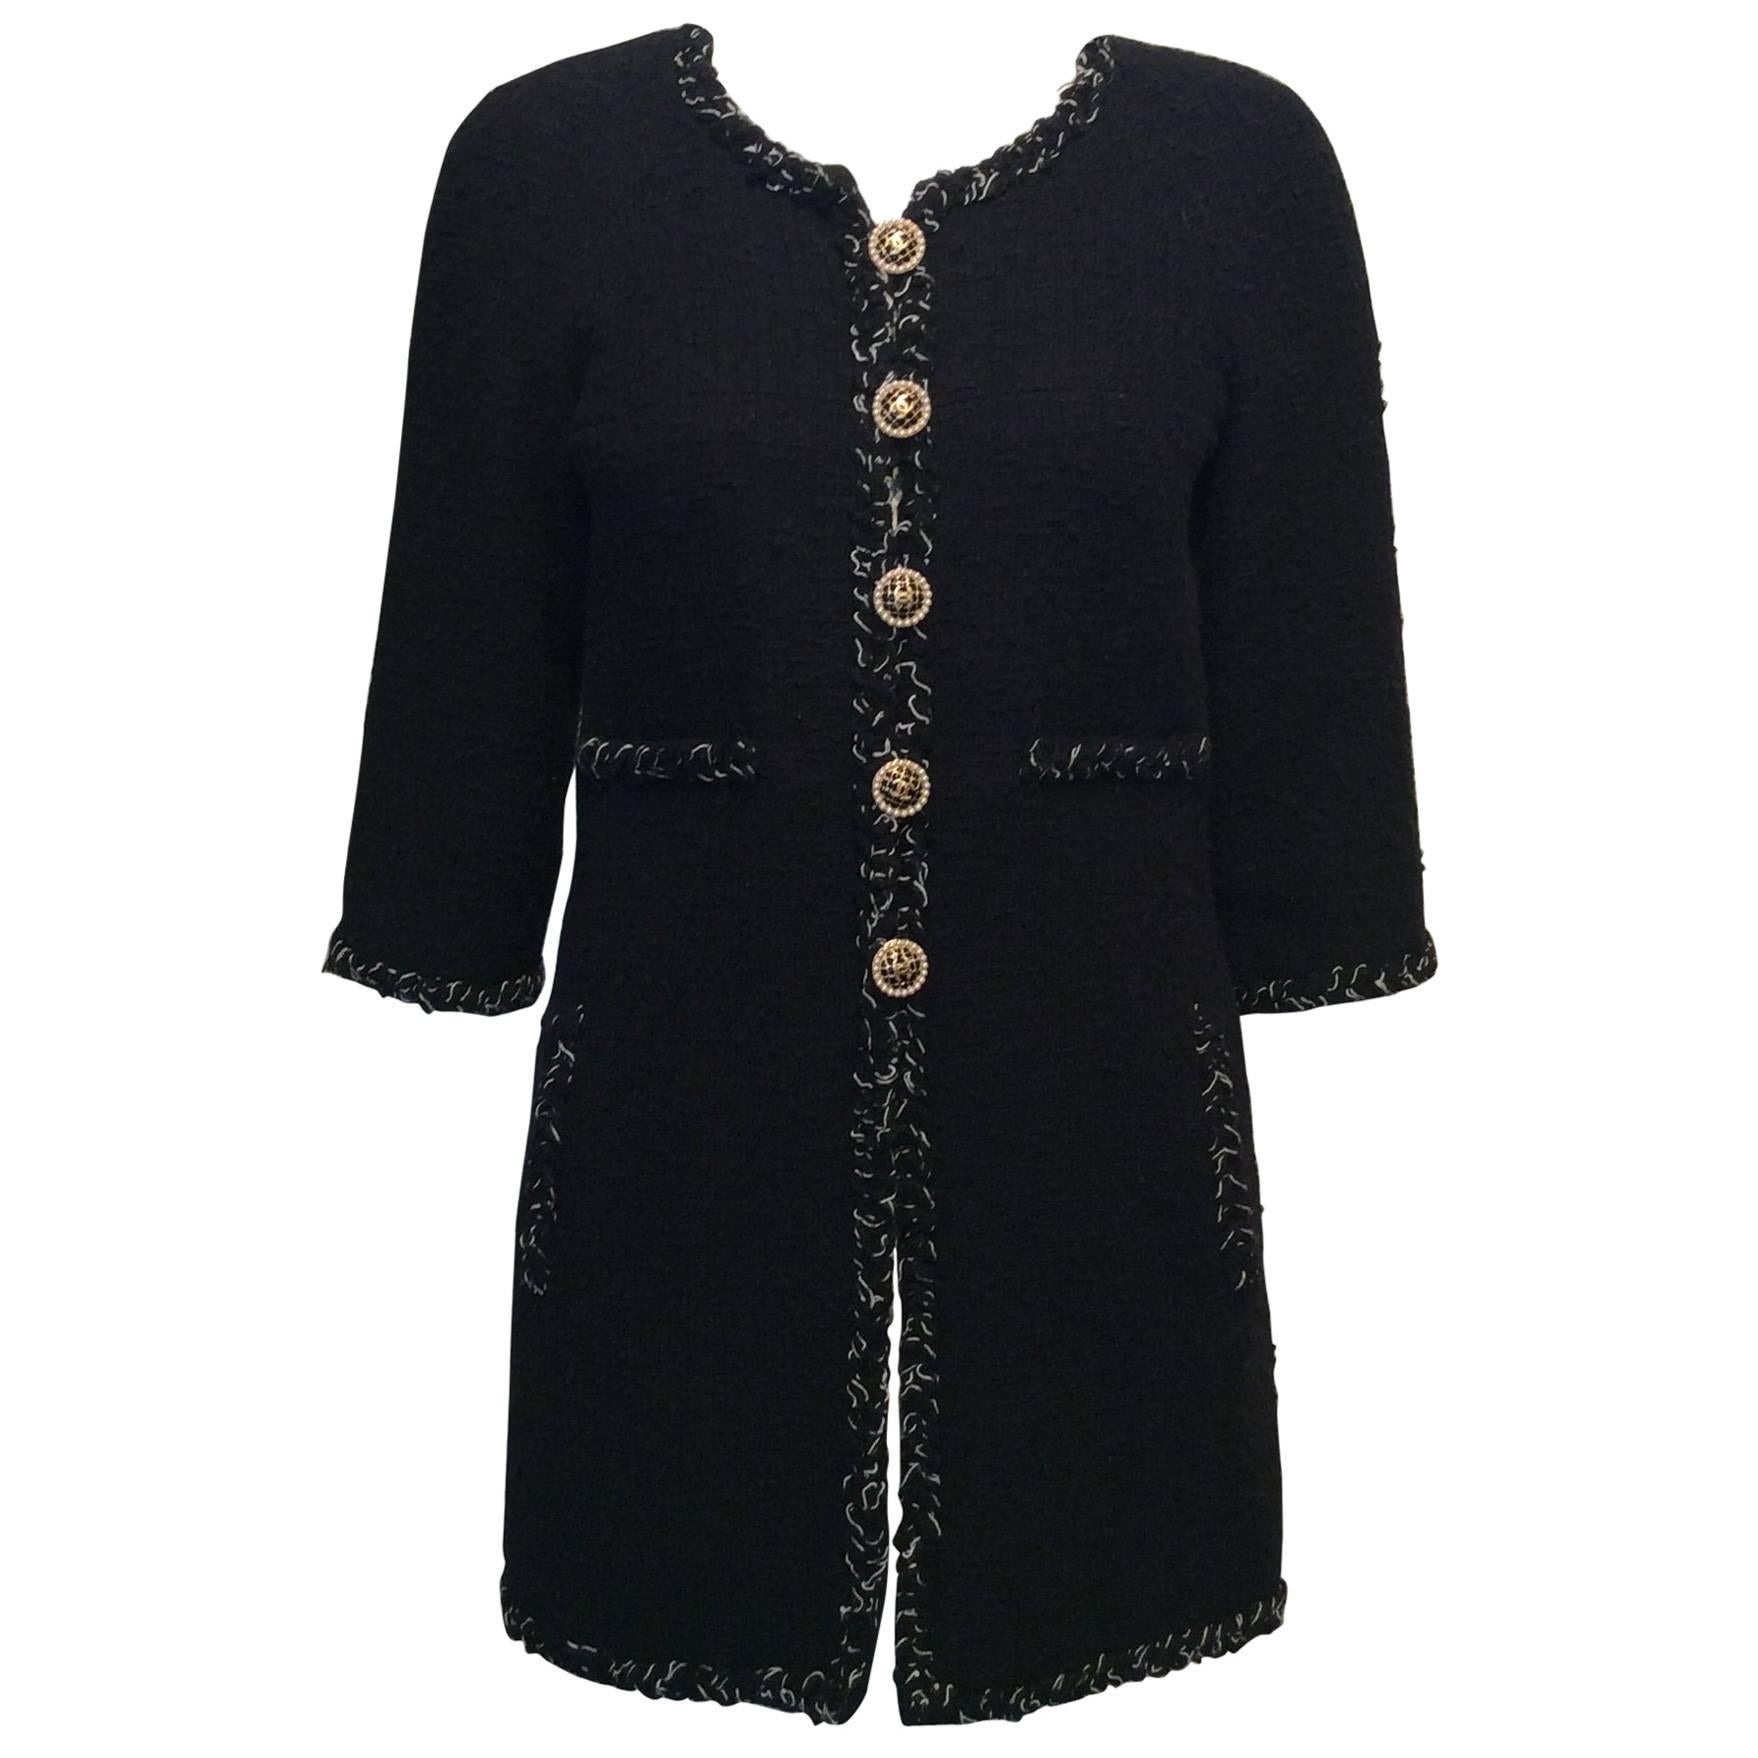 Chanel Black Tweed Coat W/ Braided Trim, Pearl and Black Enamel Buttons Sz36/Us4 For Sale